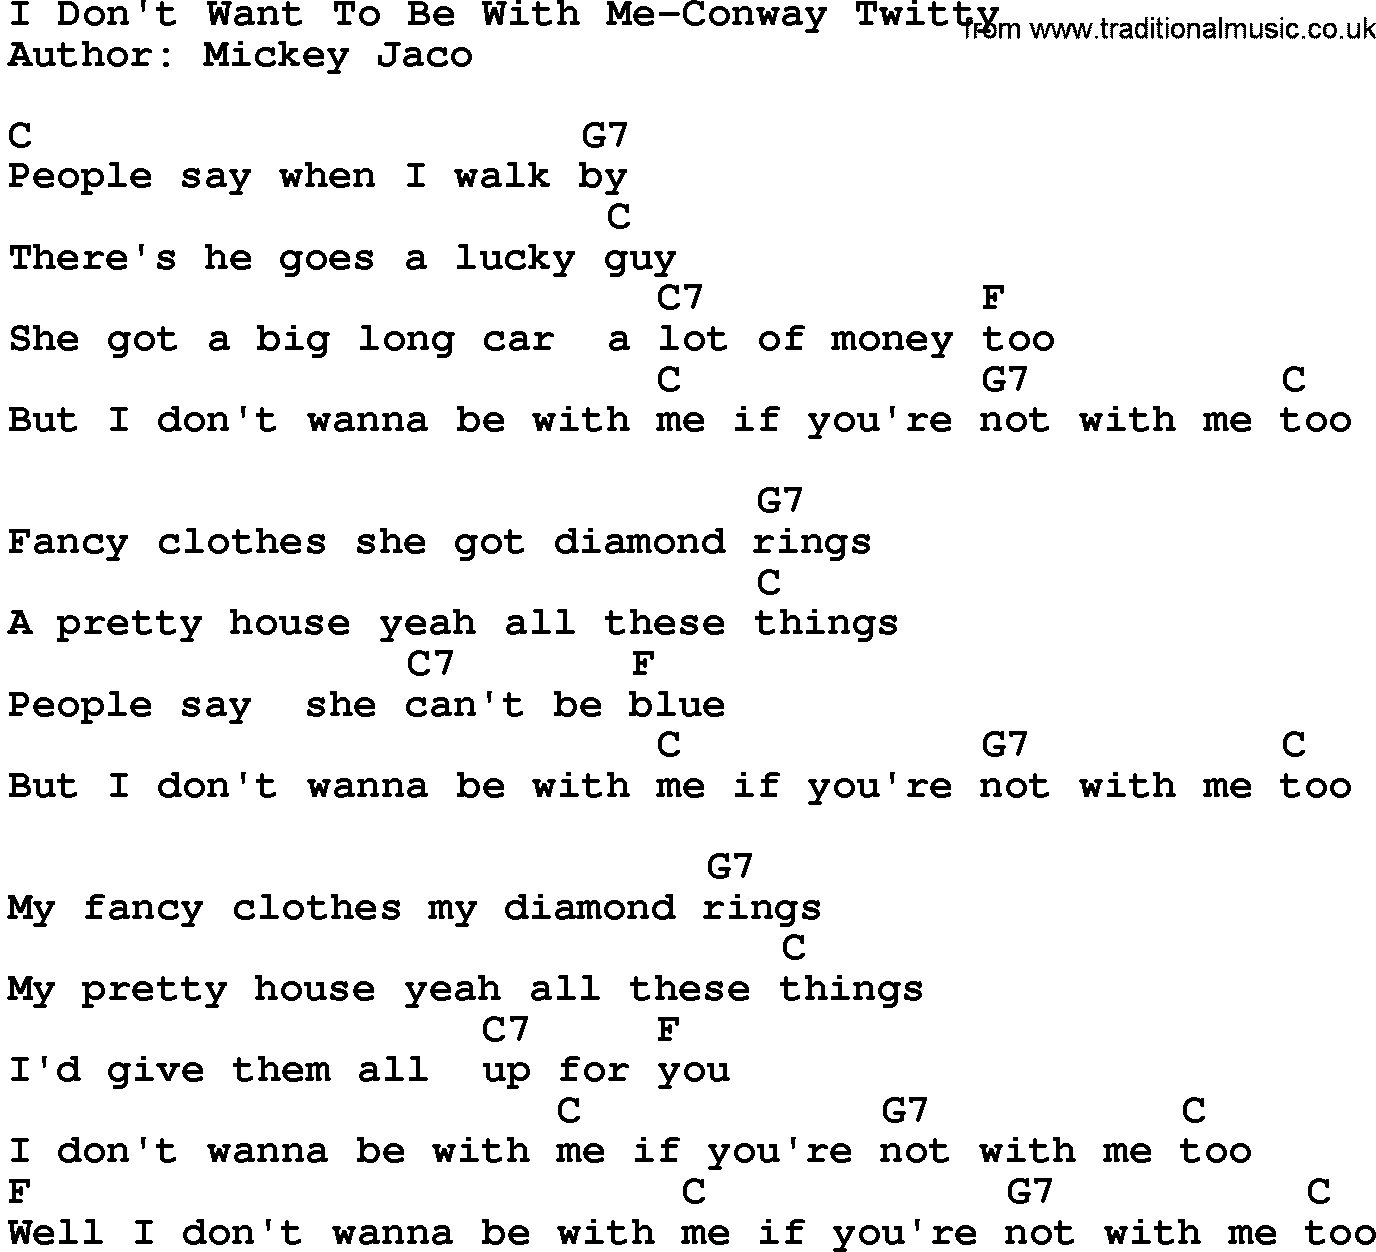 Country music song: I Don't Want To Be With Me-Conway Twitty lyrics and chords